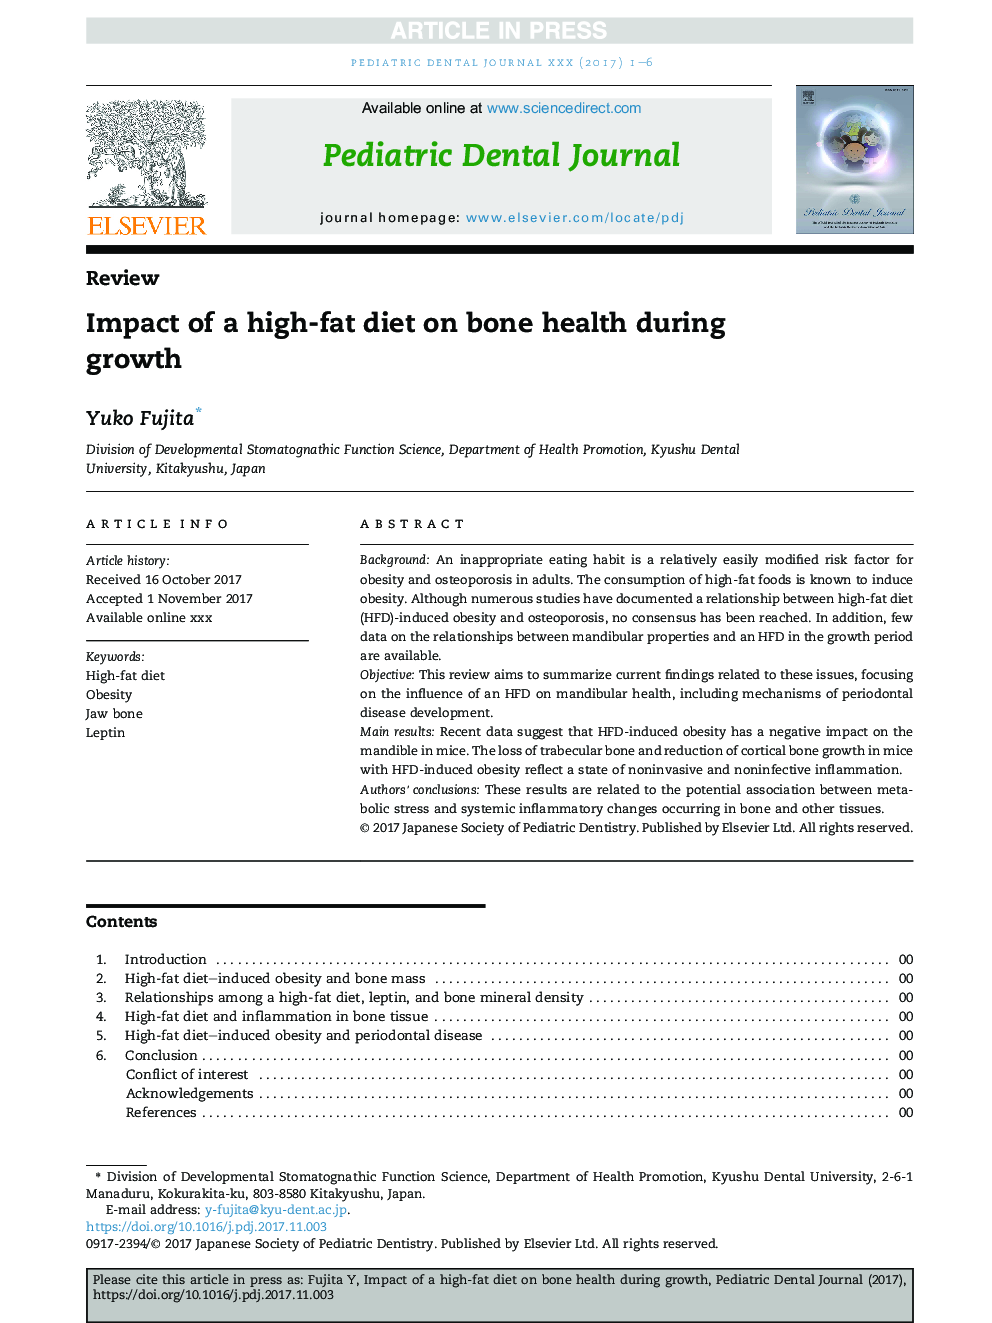 Impact of a high-fat diet on bone health during growth